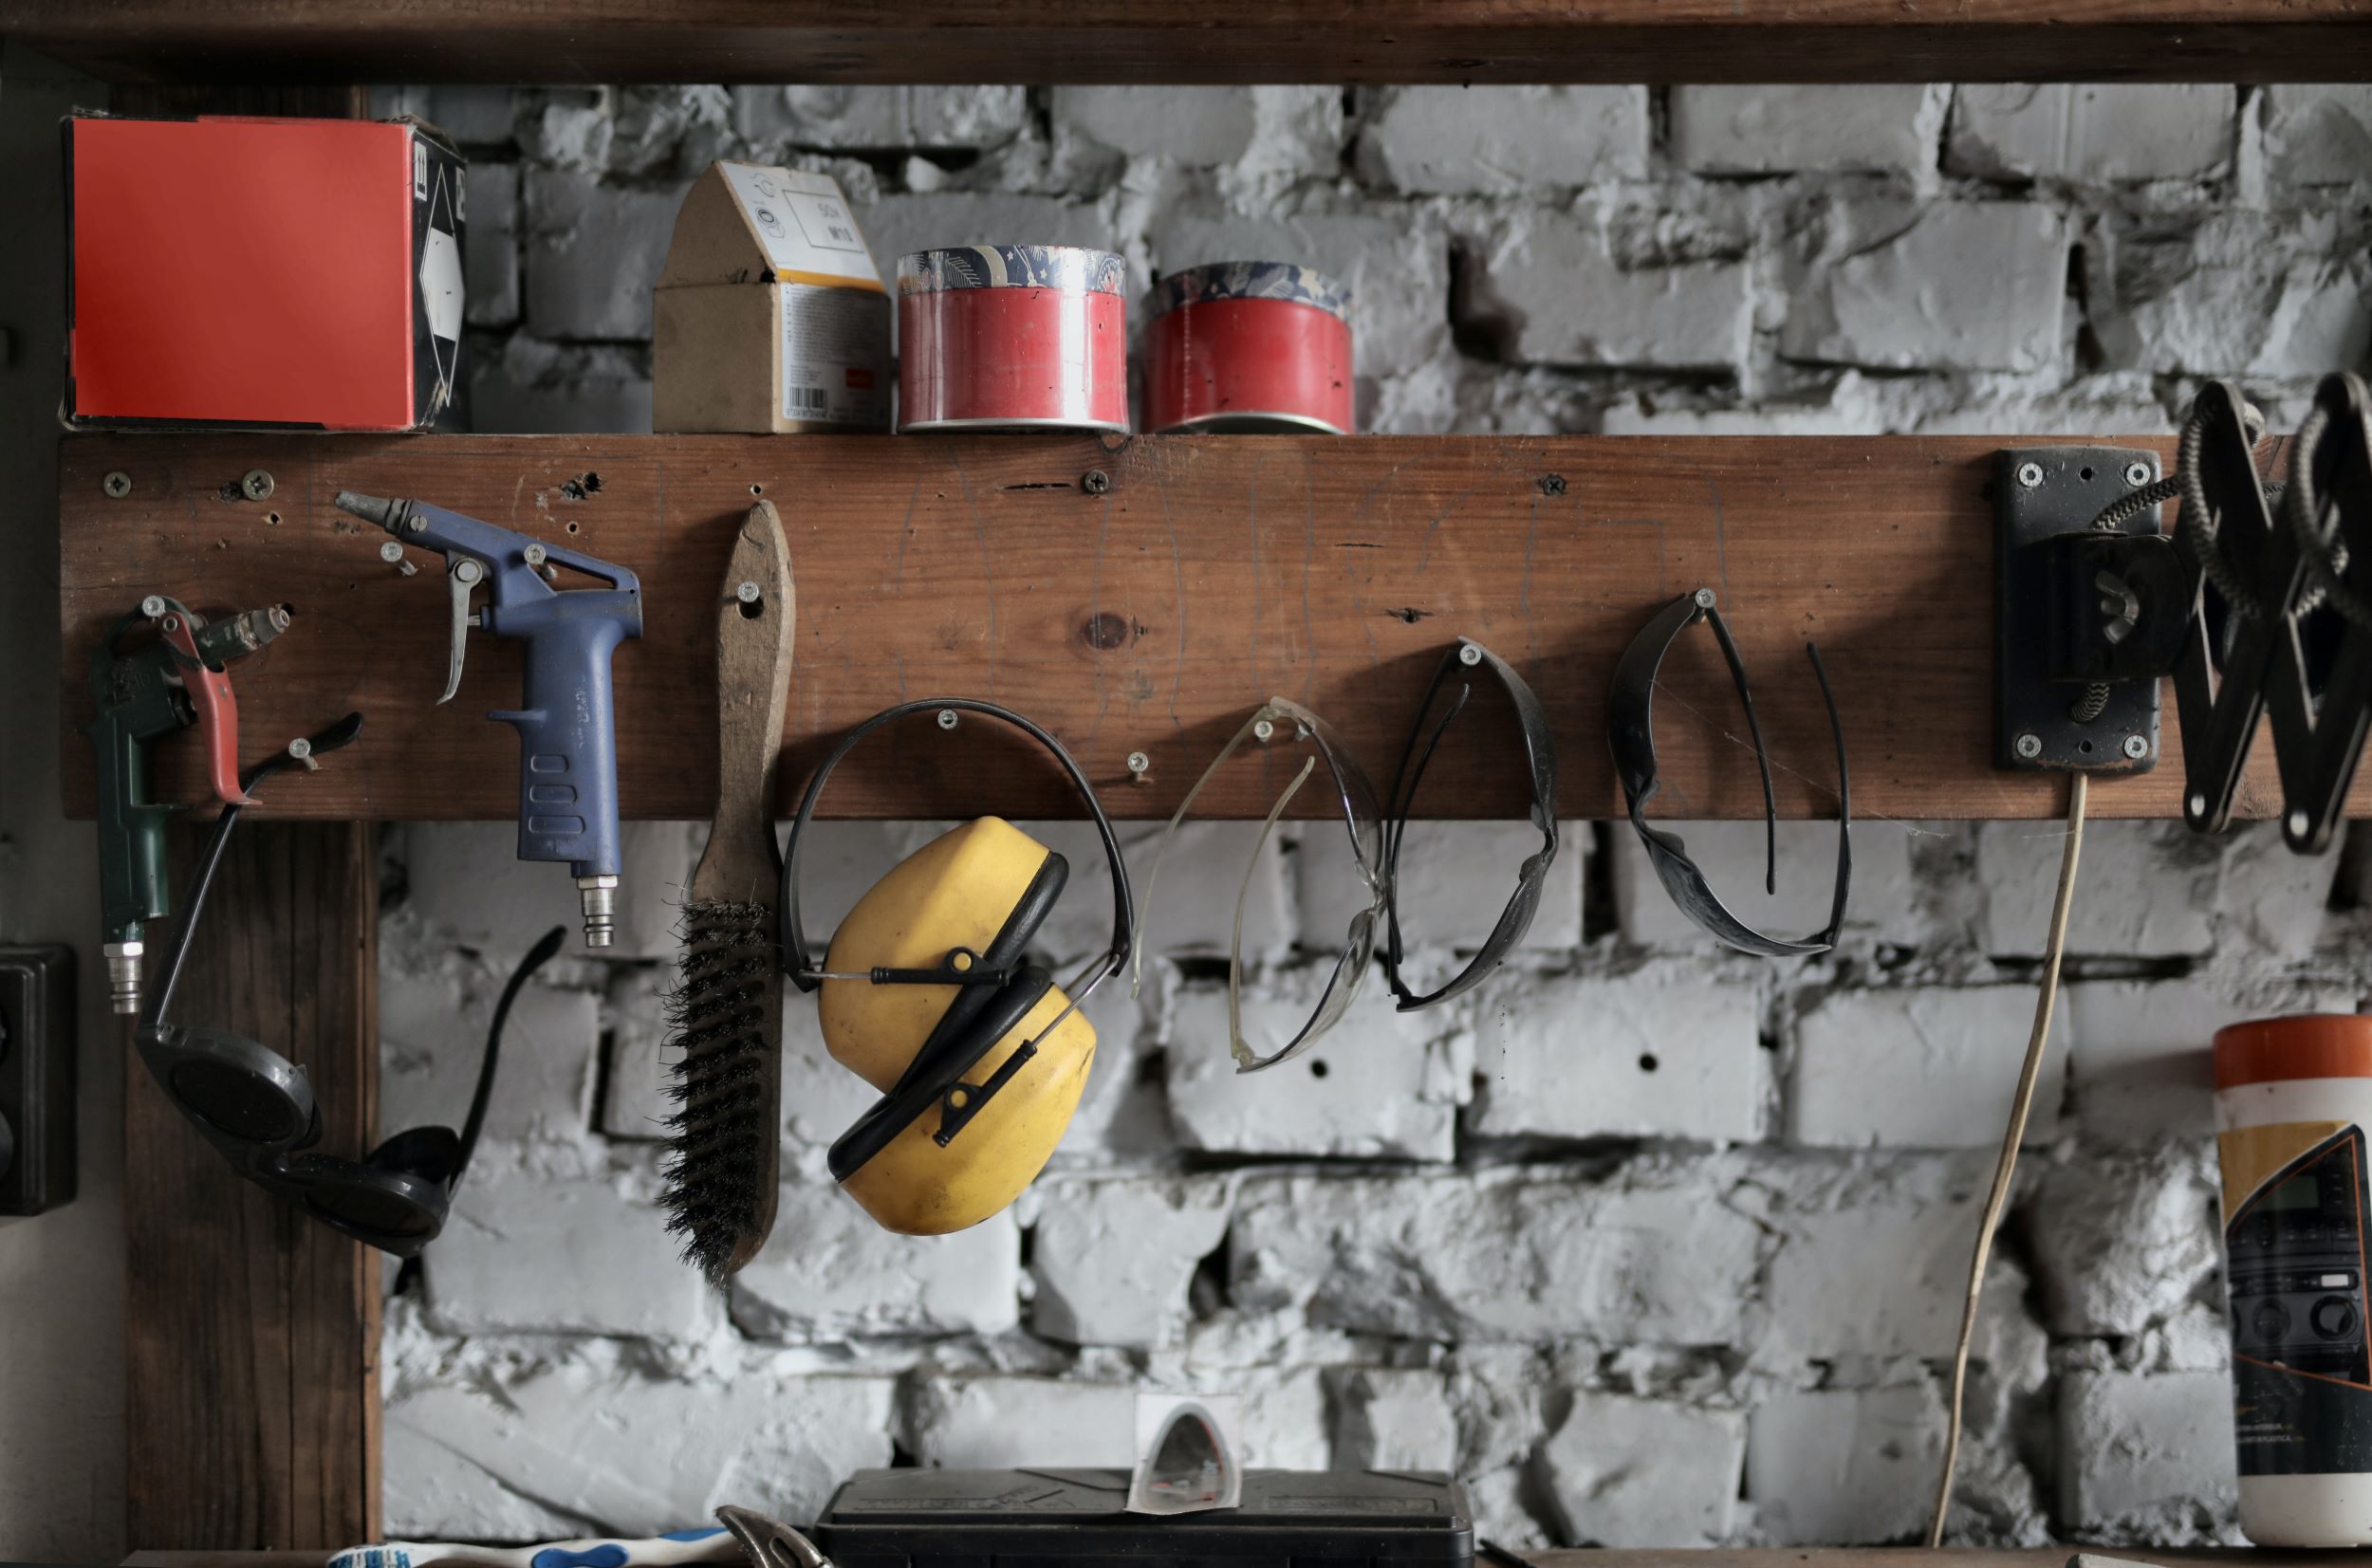 5 Tips for Making the Most Out of Your Garage Space